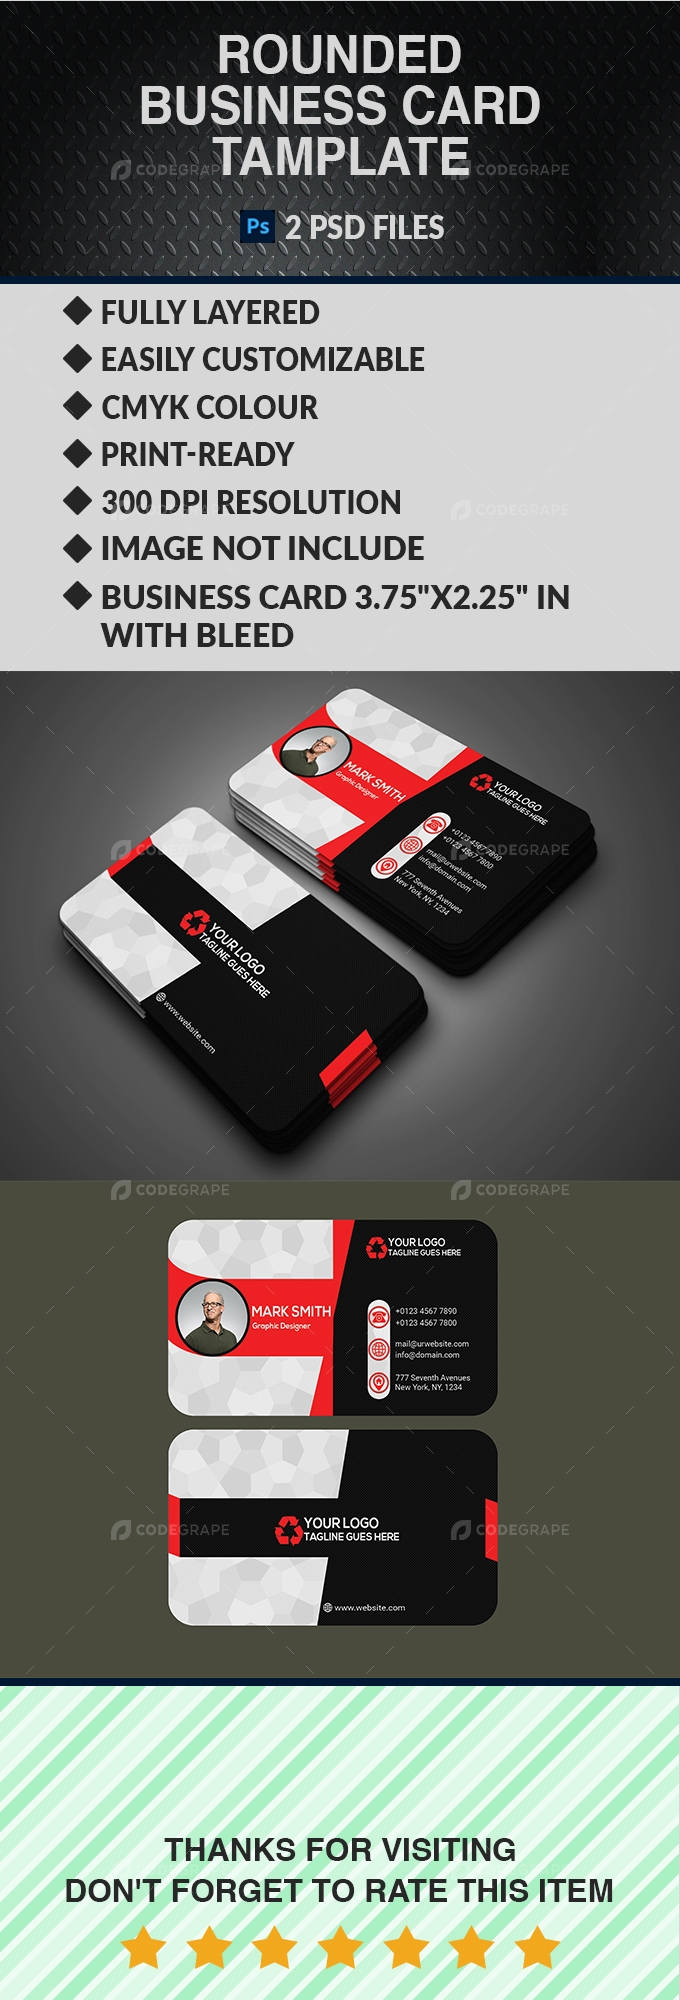 Rounded Business Card 2021